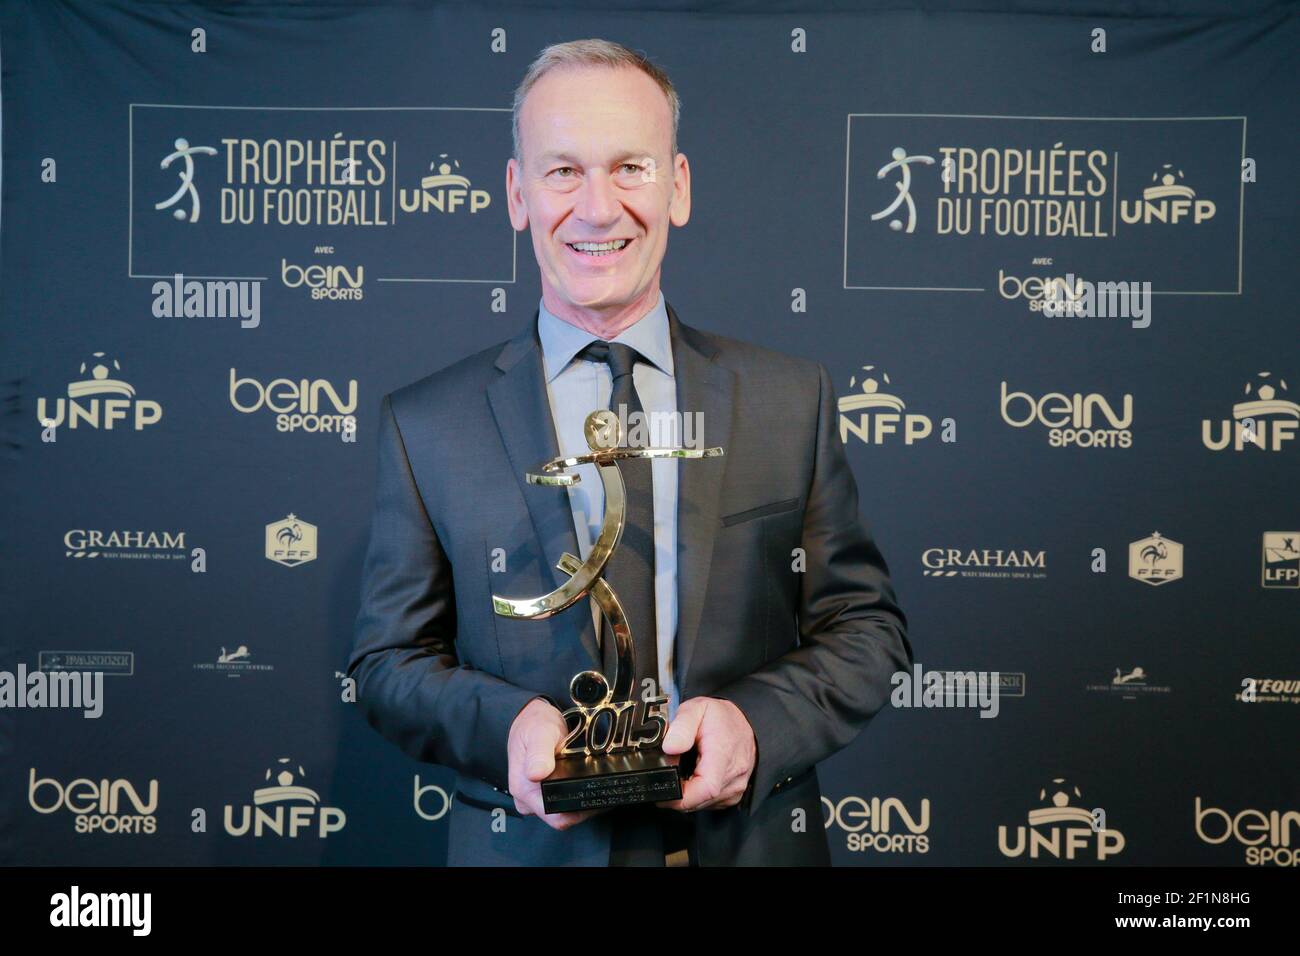 Jean-Marc Furlan (Troyes) at the studio shoot area with his trophy during the UNFP (Union National des Footballeurs Professionnels) Trophies ceremony, rewards for the best in their respective football categories, TV broadcast on BeIN SPORTS at Pavillon Gabriel in Paris, France on may 17, 2015 - Photo Stephane Allaman / DPPI Stock Photo